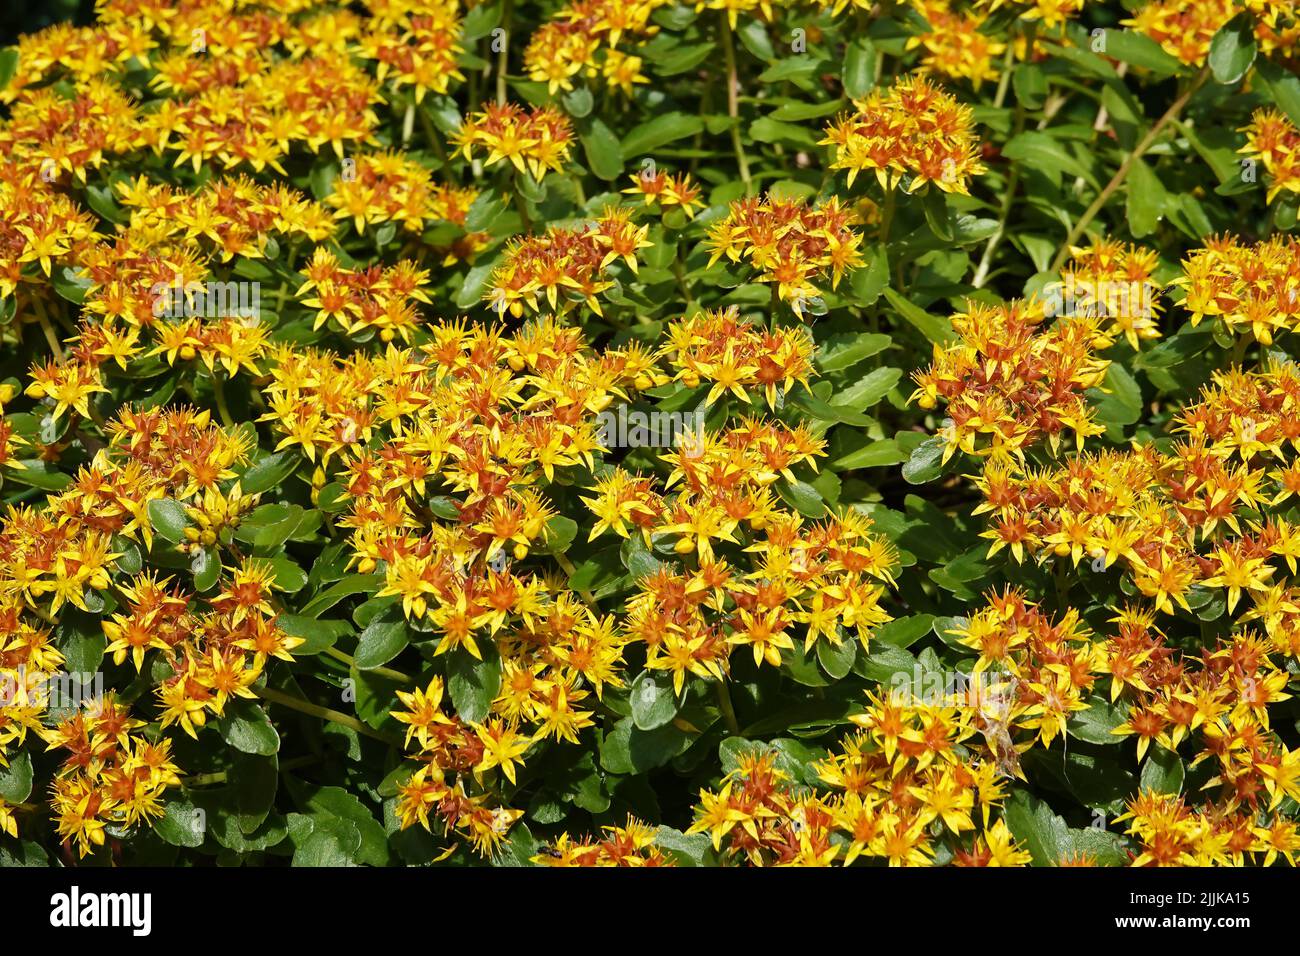 Flower Stonecrop Kamchatsky or Sedum is a herbaceous plant, Crassulaceae family Stock Photo